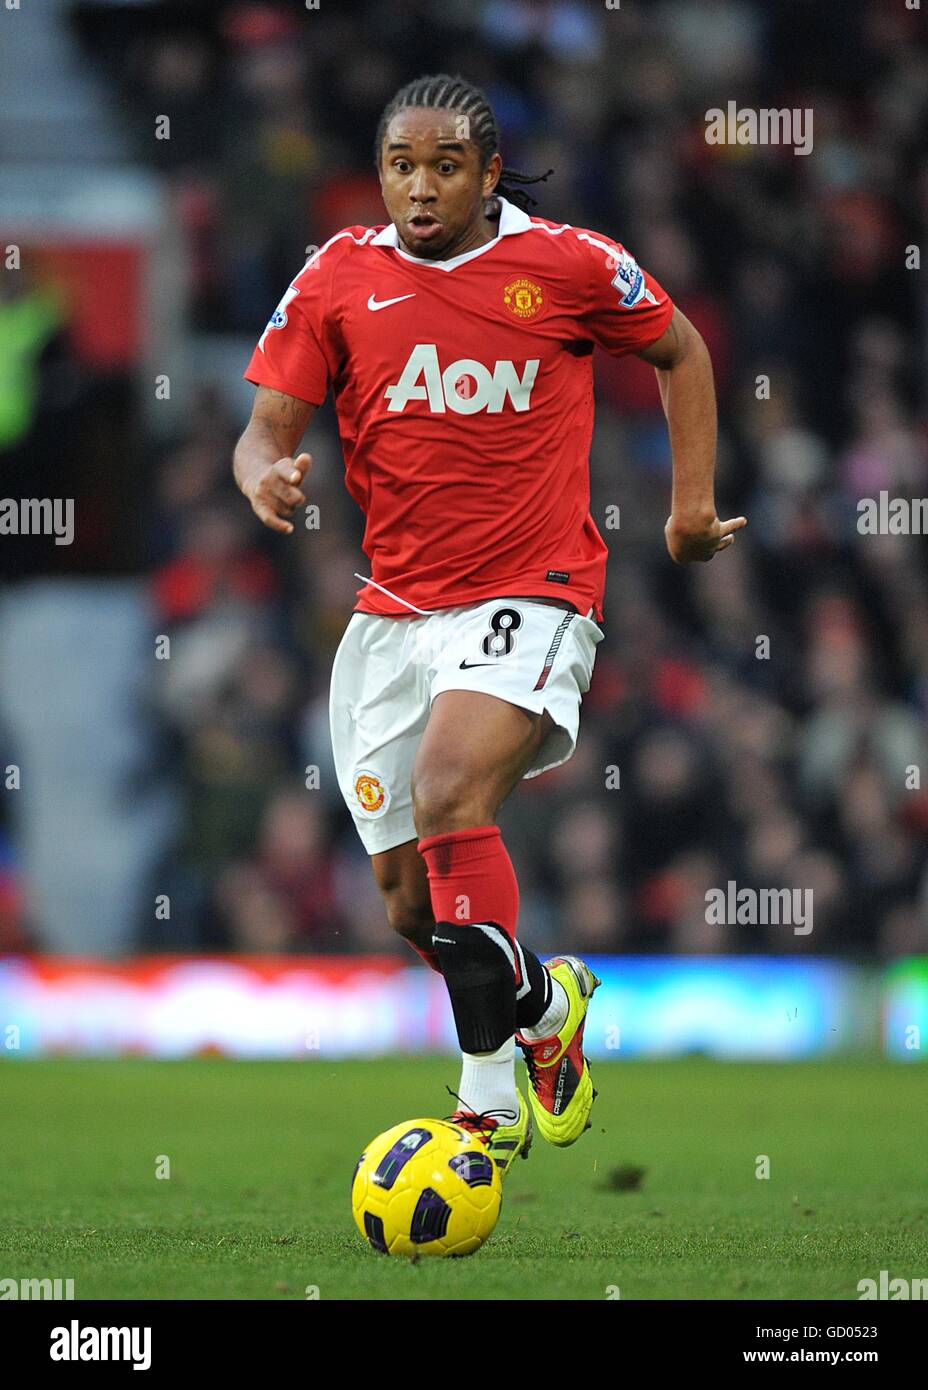 Fútbol - Barclays Premier League - Manchester United contra Sunderland - Old Trafford. Oliveira Anderson, Manchester United Foto de stock